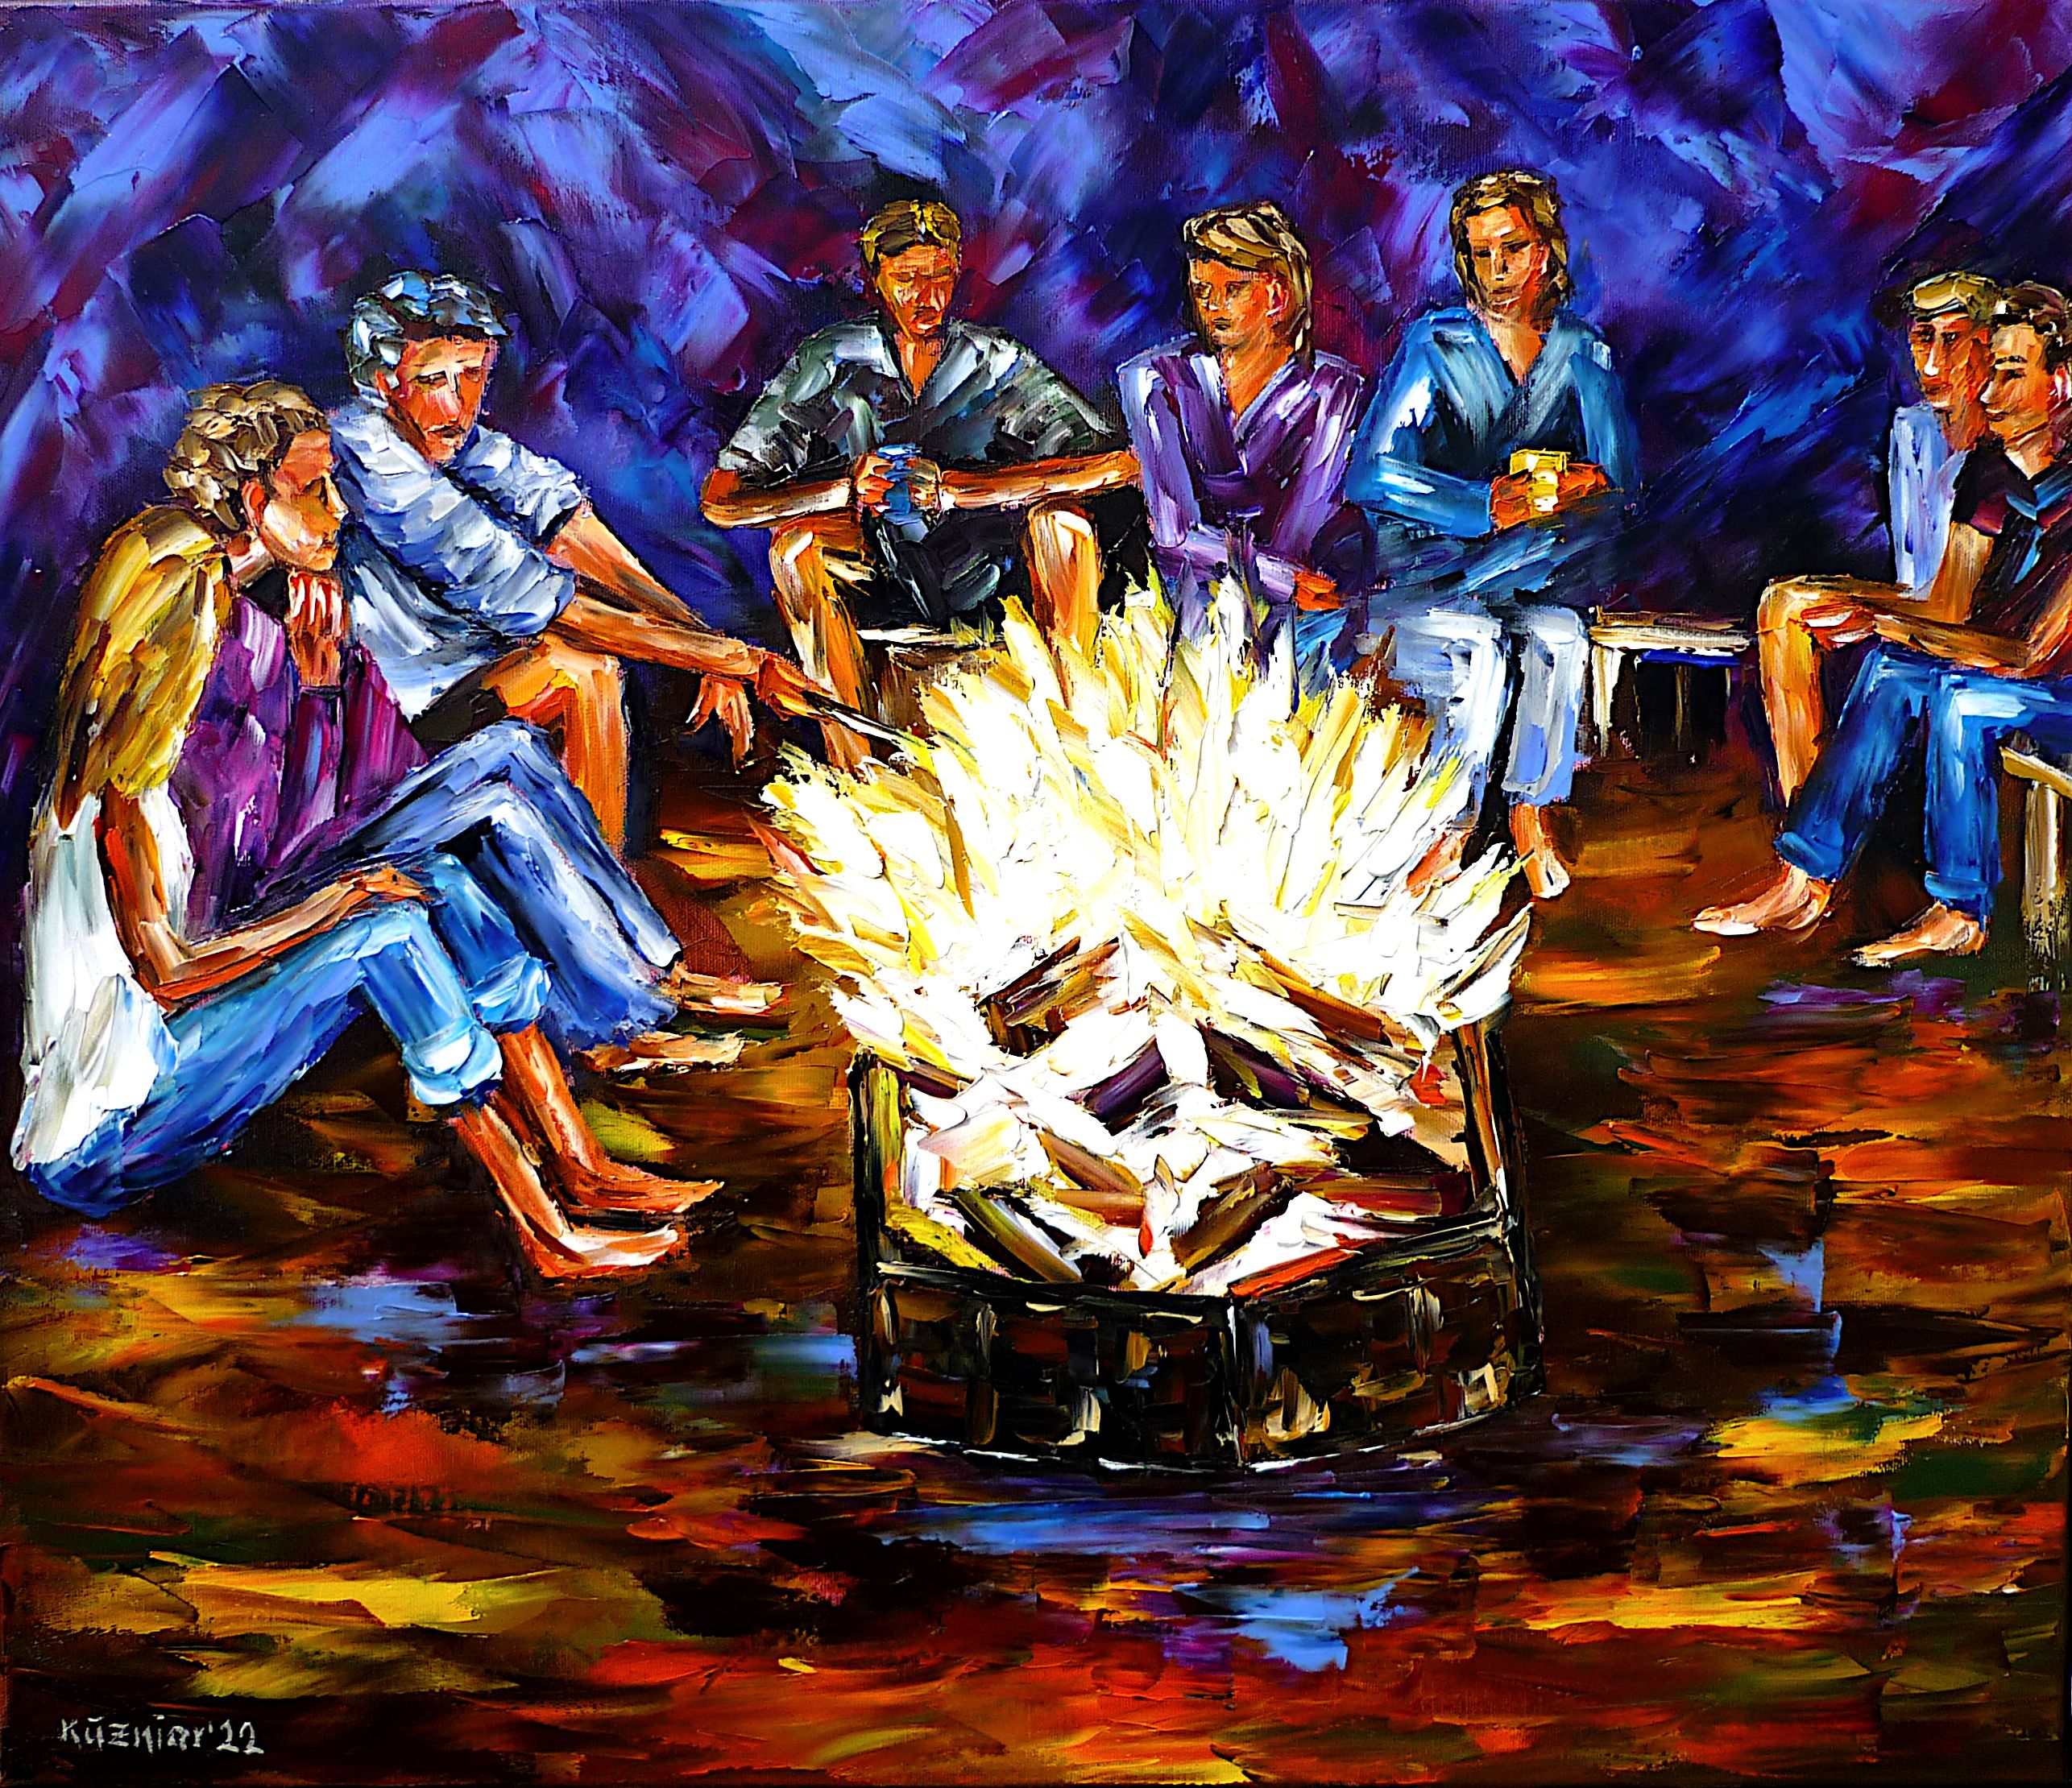 People by the campfire,campfire at night,sitting at the campfire,campfire romance,grilling at the campfire,people grilling,night romance,fire at night,camping,camping romance,family grilling,sitting together,family celebration,people in summer,summer night,summer barbecue,summer feelings,summertime,summer painting,summer picture,beautiful time,peaceful,people in the green,people outdoors,people in nature,romantic scene,romantic night,romantic picture,palette knife oil painting,modern art,modern painting,impressionism,abstract painting,lively colors,colorful painting,bright colors,light reflections,impasto painting,figurative